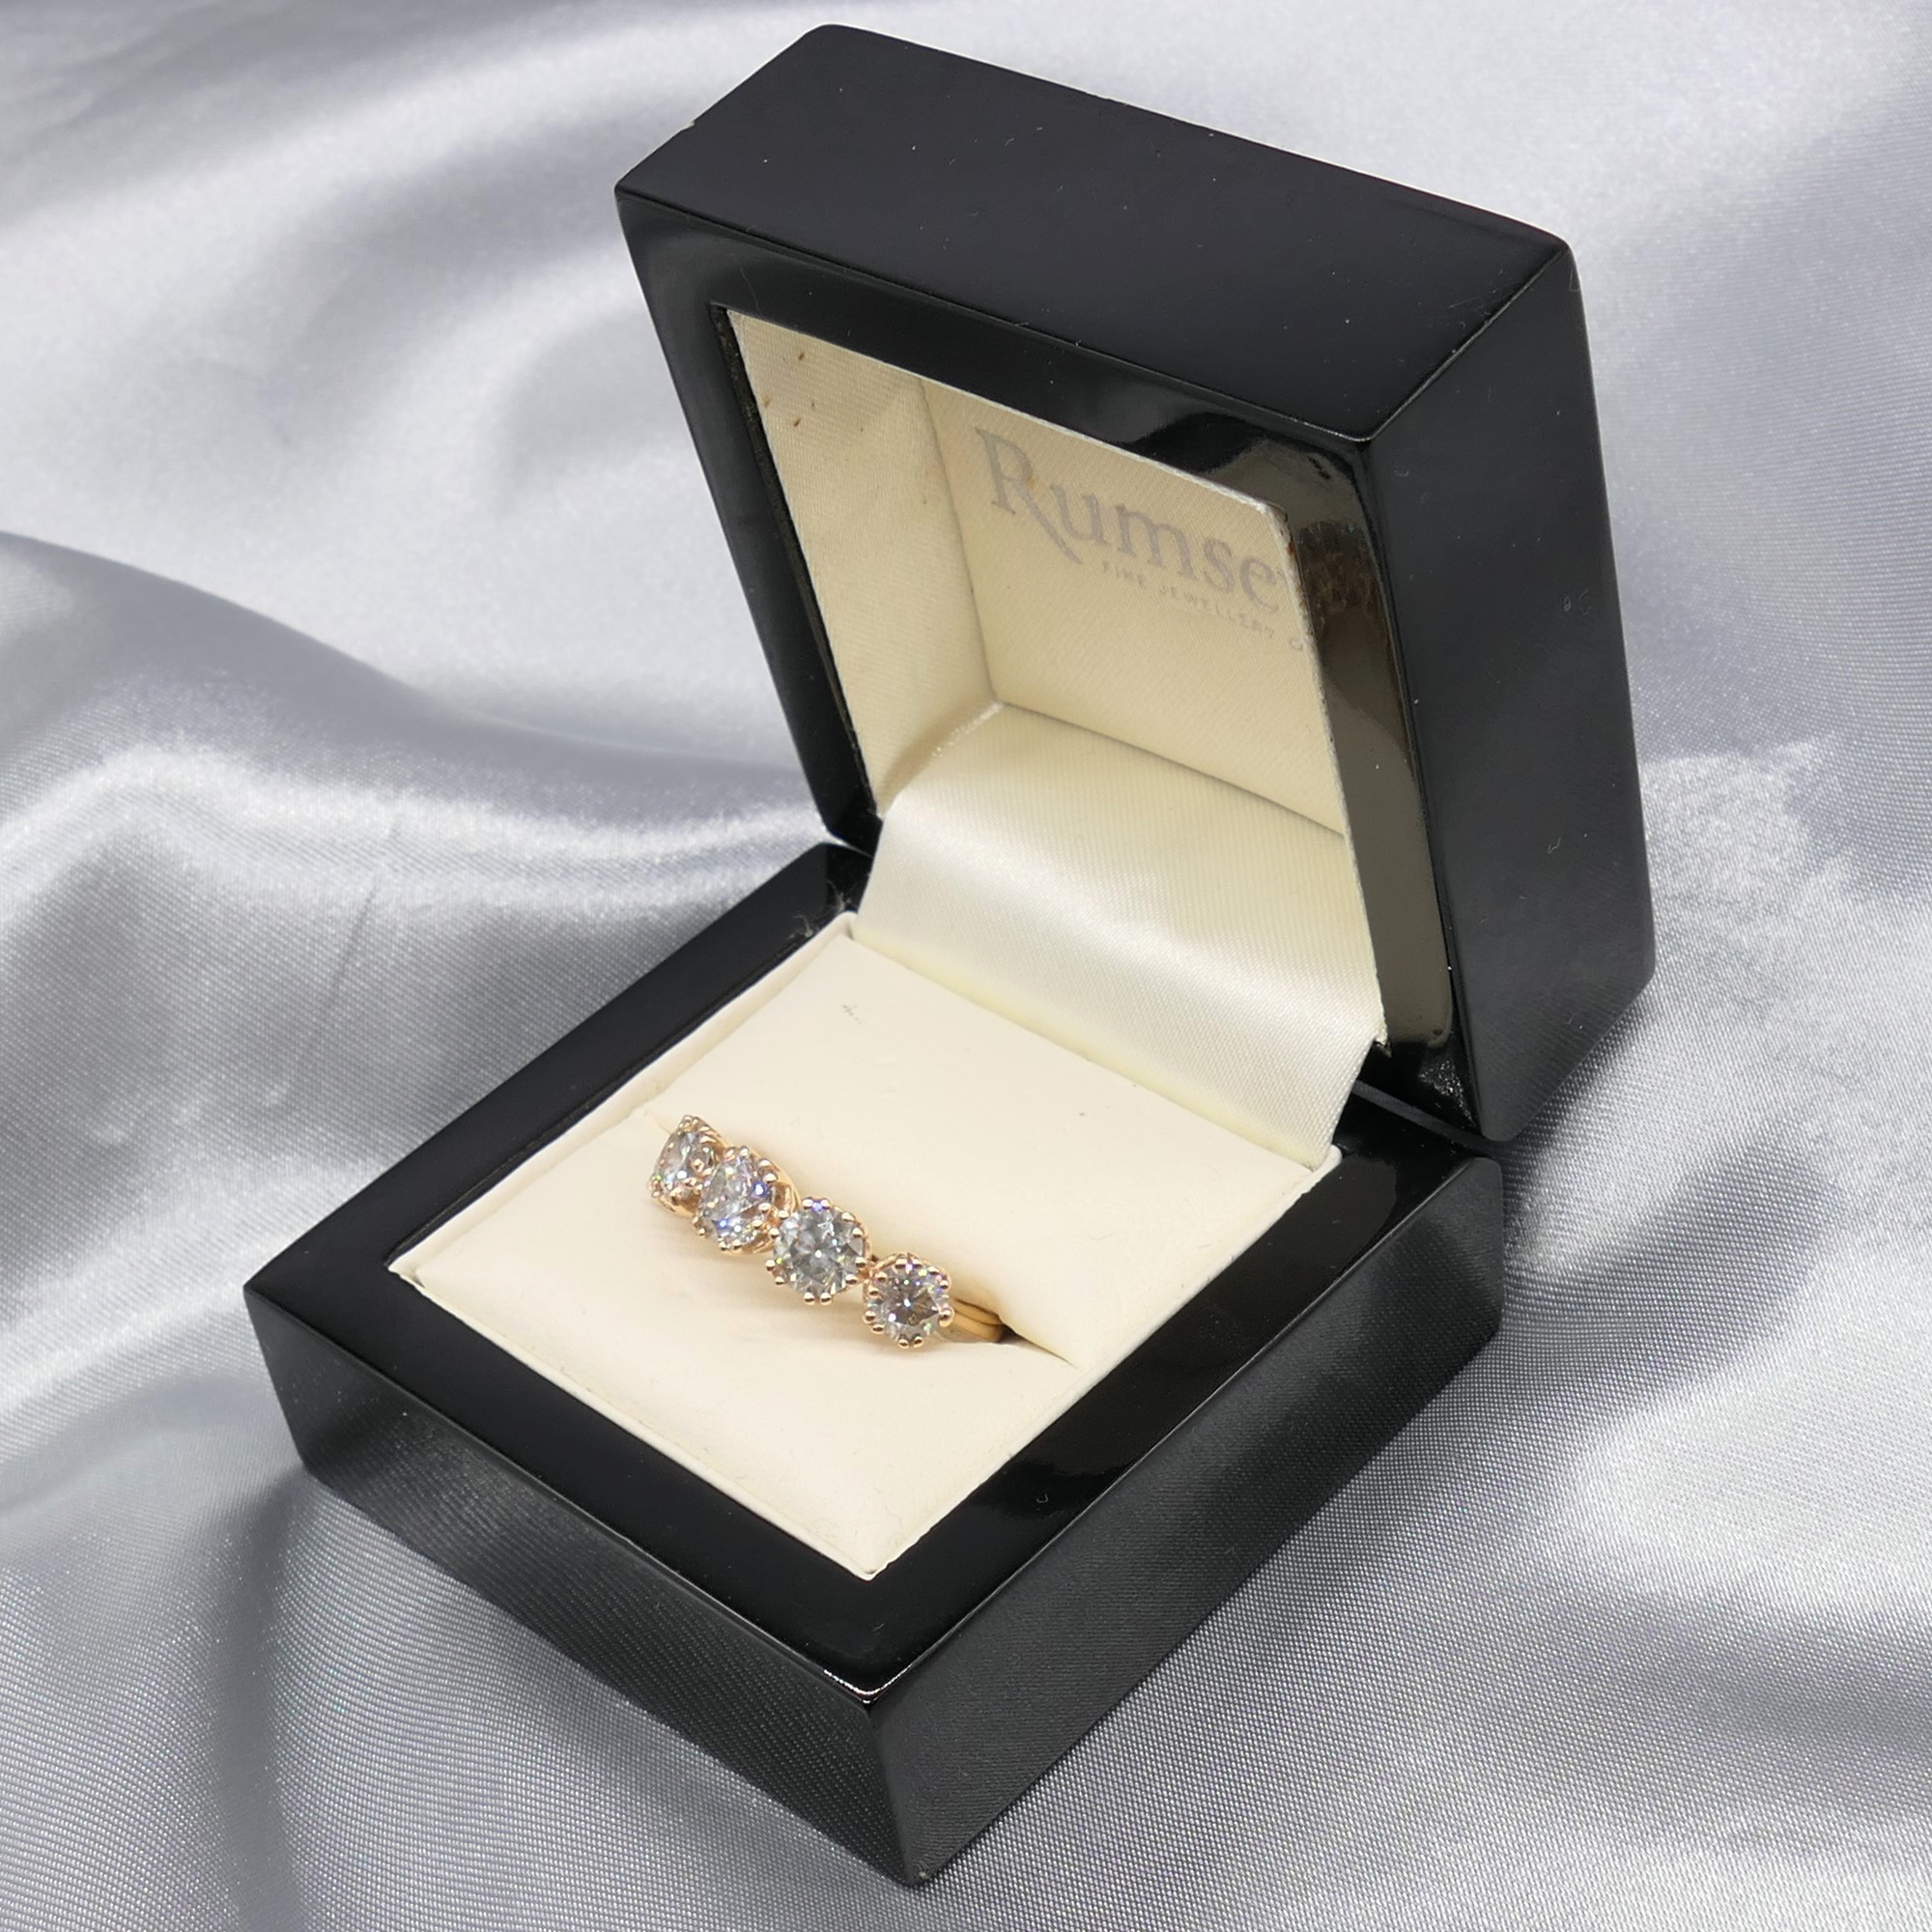 18Ct Rose Gold 3.19 Carat 5-Stone Diamond Ring With Certificate and Gift Box - Image 2 of 8